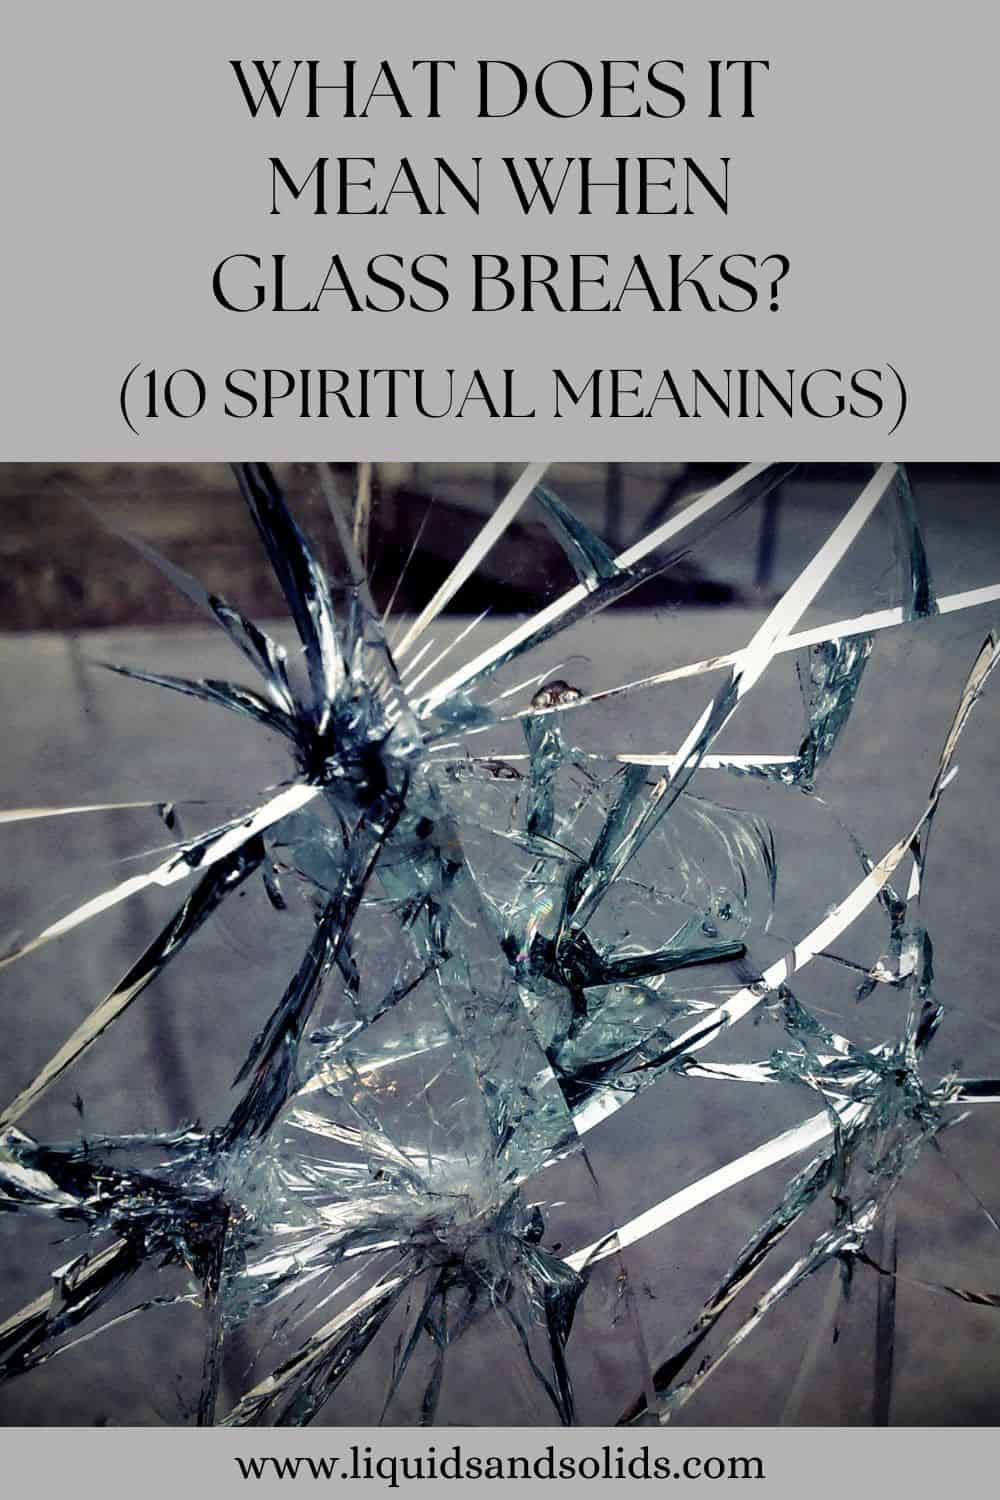 What Does It Mean When Glass Breaks? (10 Spiritual Meanings)